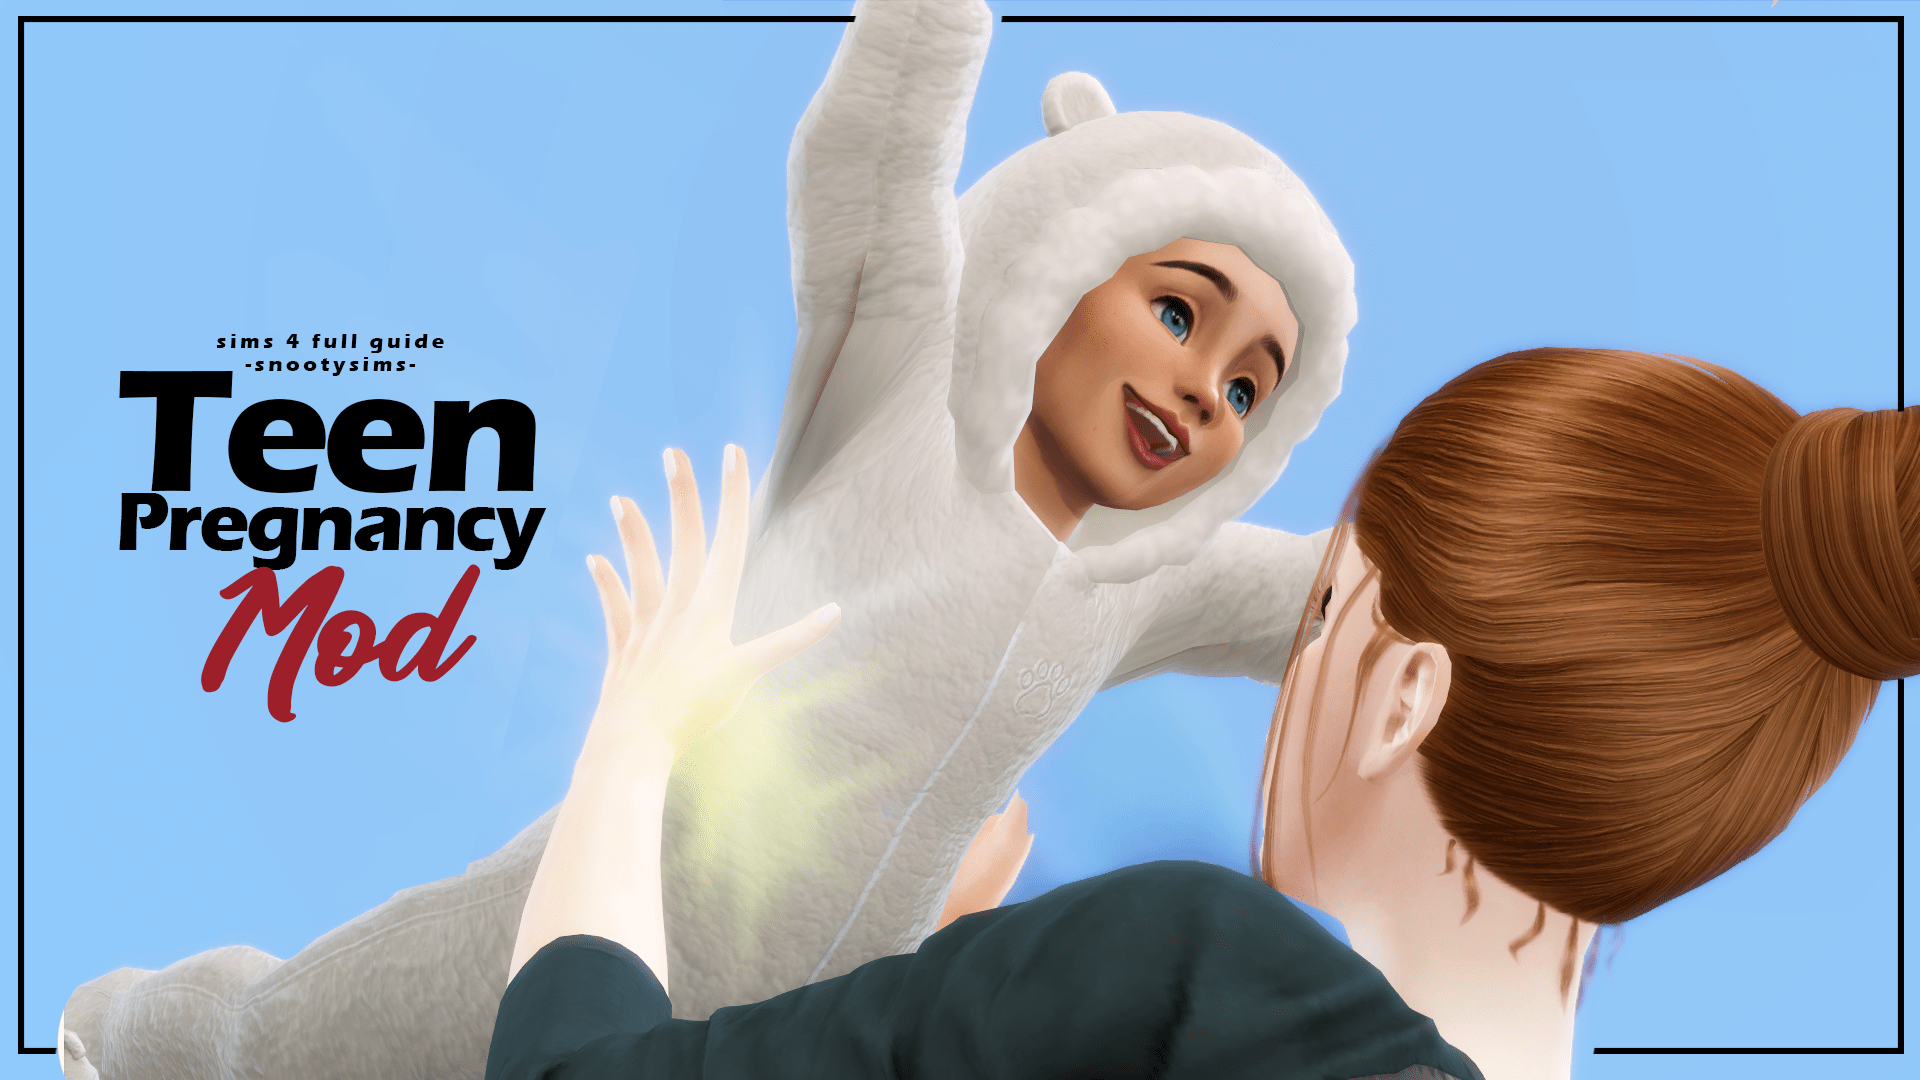 The Inside Scoop on The Sims 4 Teen Pregnancy Mod! — SNOOTYSIMS